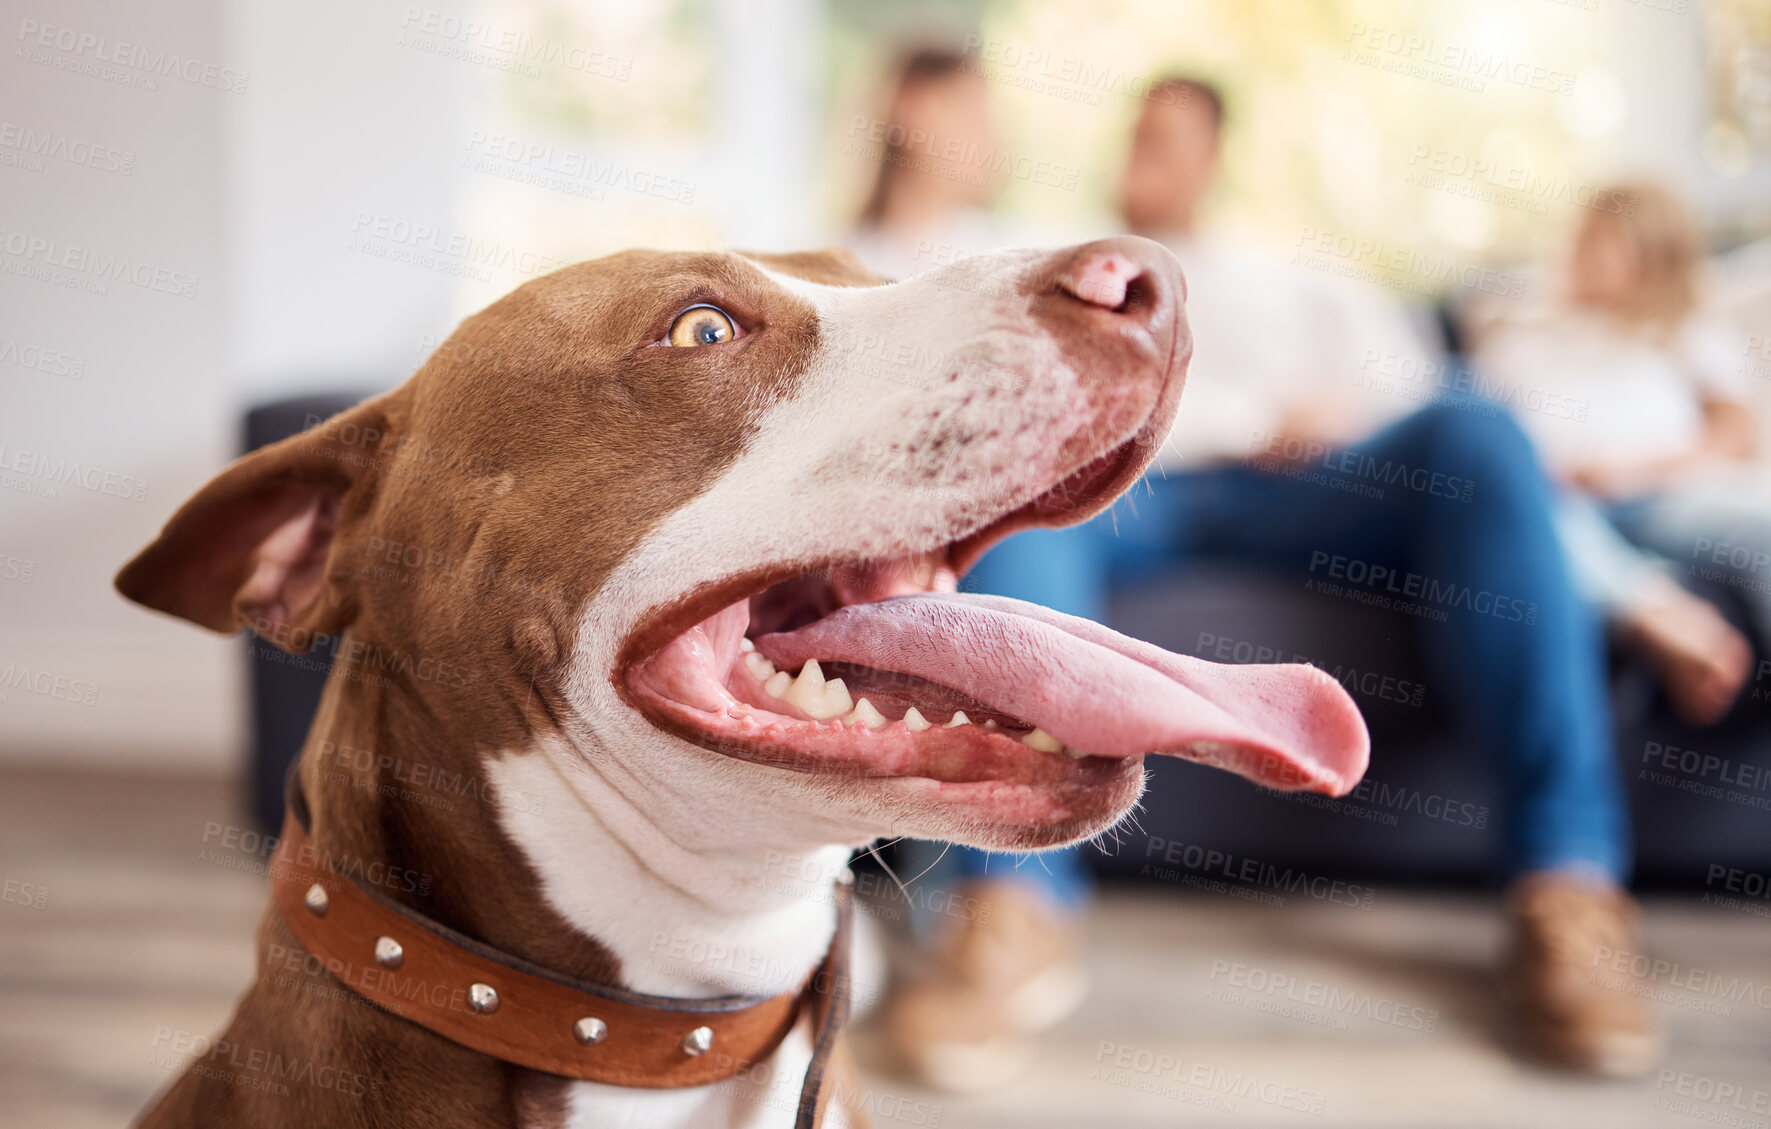 Buy stock photo Shot of an American Pit Bull Terrier sitting at a home while his family relax behind him